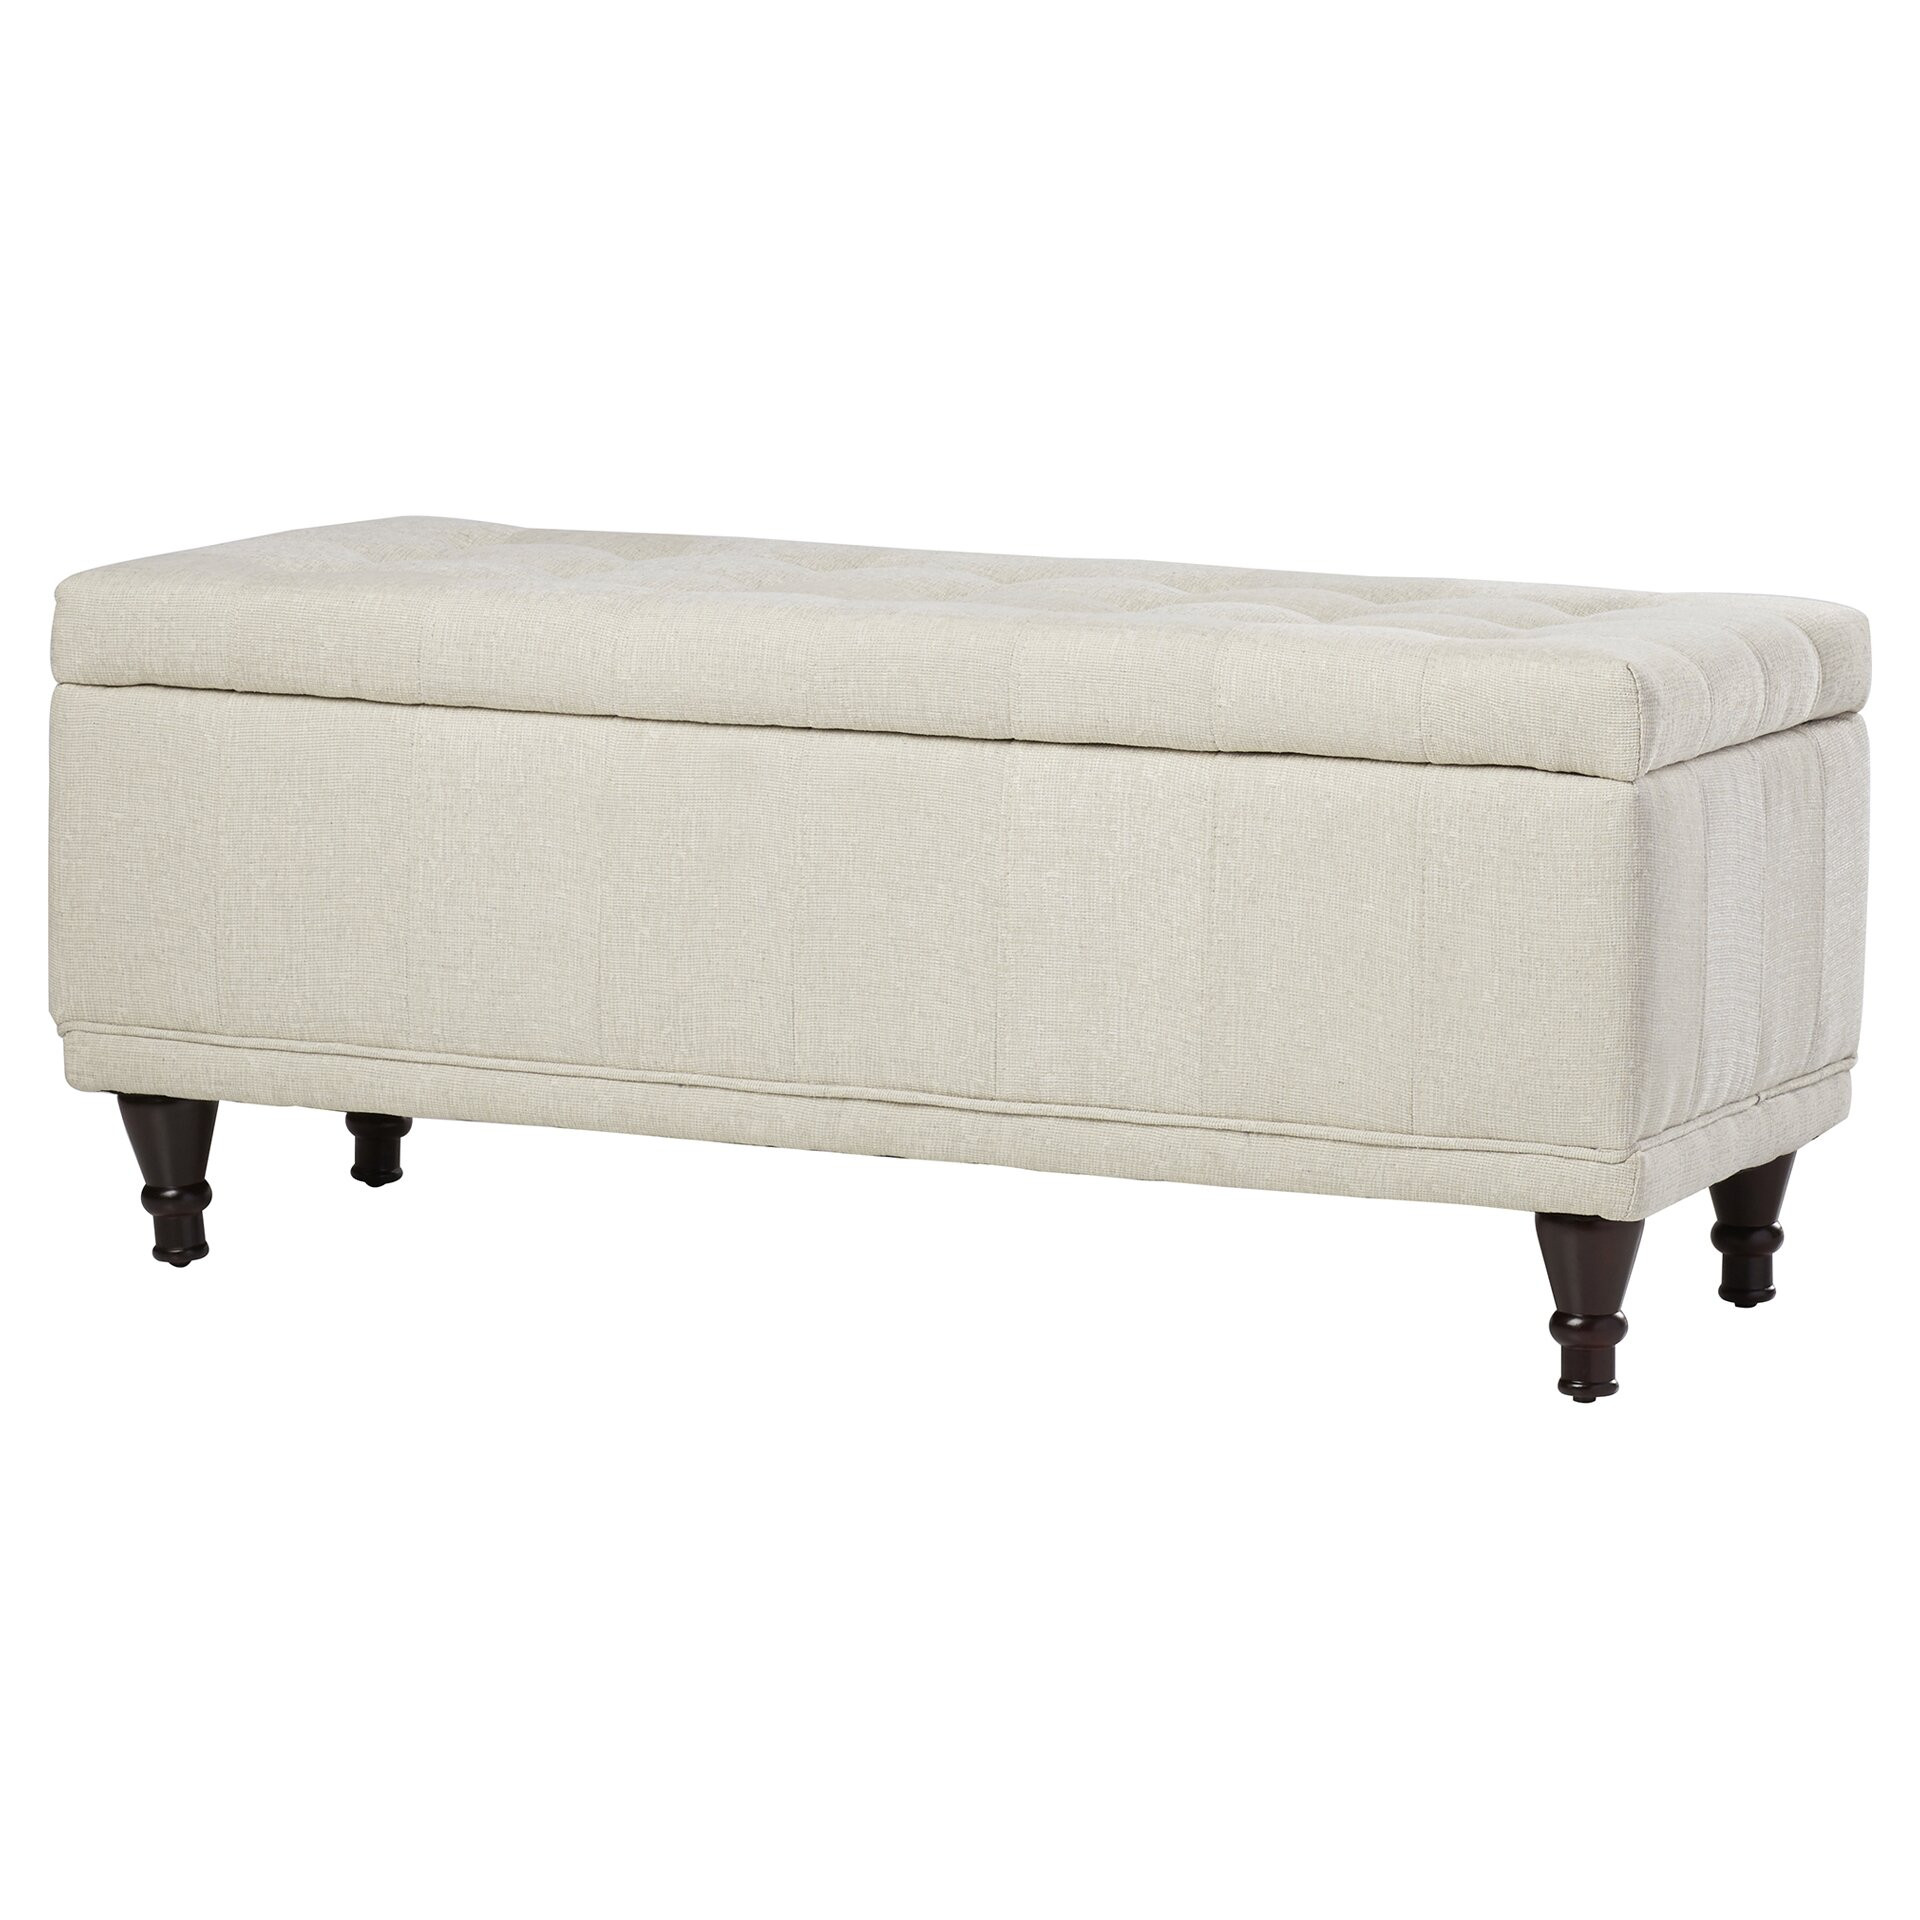 Bedroom Storage Ottoman
 Darby Home Co Attles Fabric Bedroom Storage Ottoman